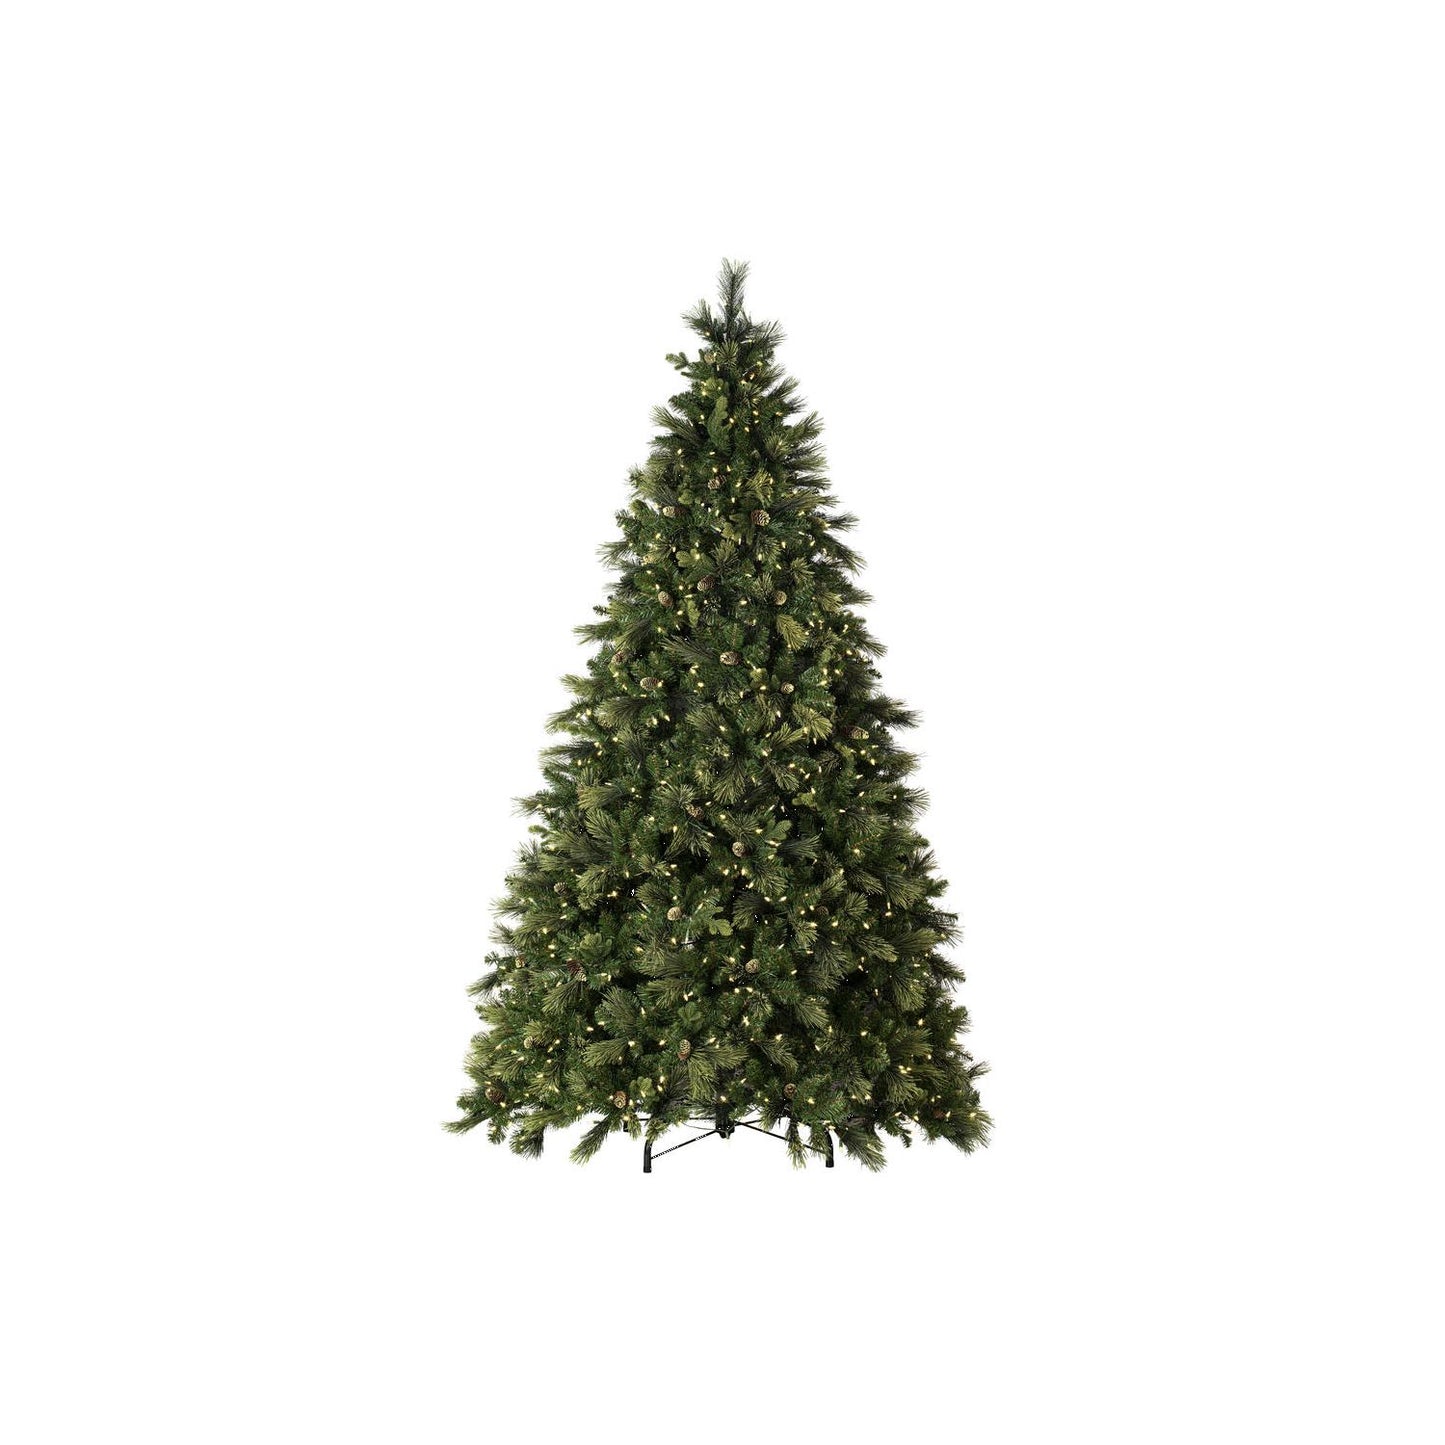 Vickerman 9' X 74" Emerald Mixed Fir Christmas Tree With Warm White Led Lights